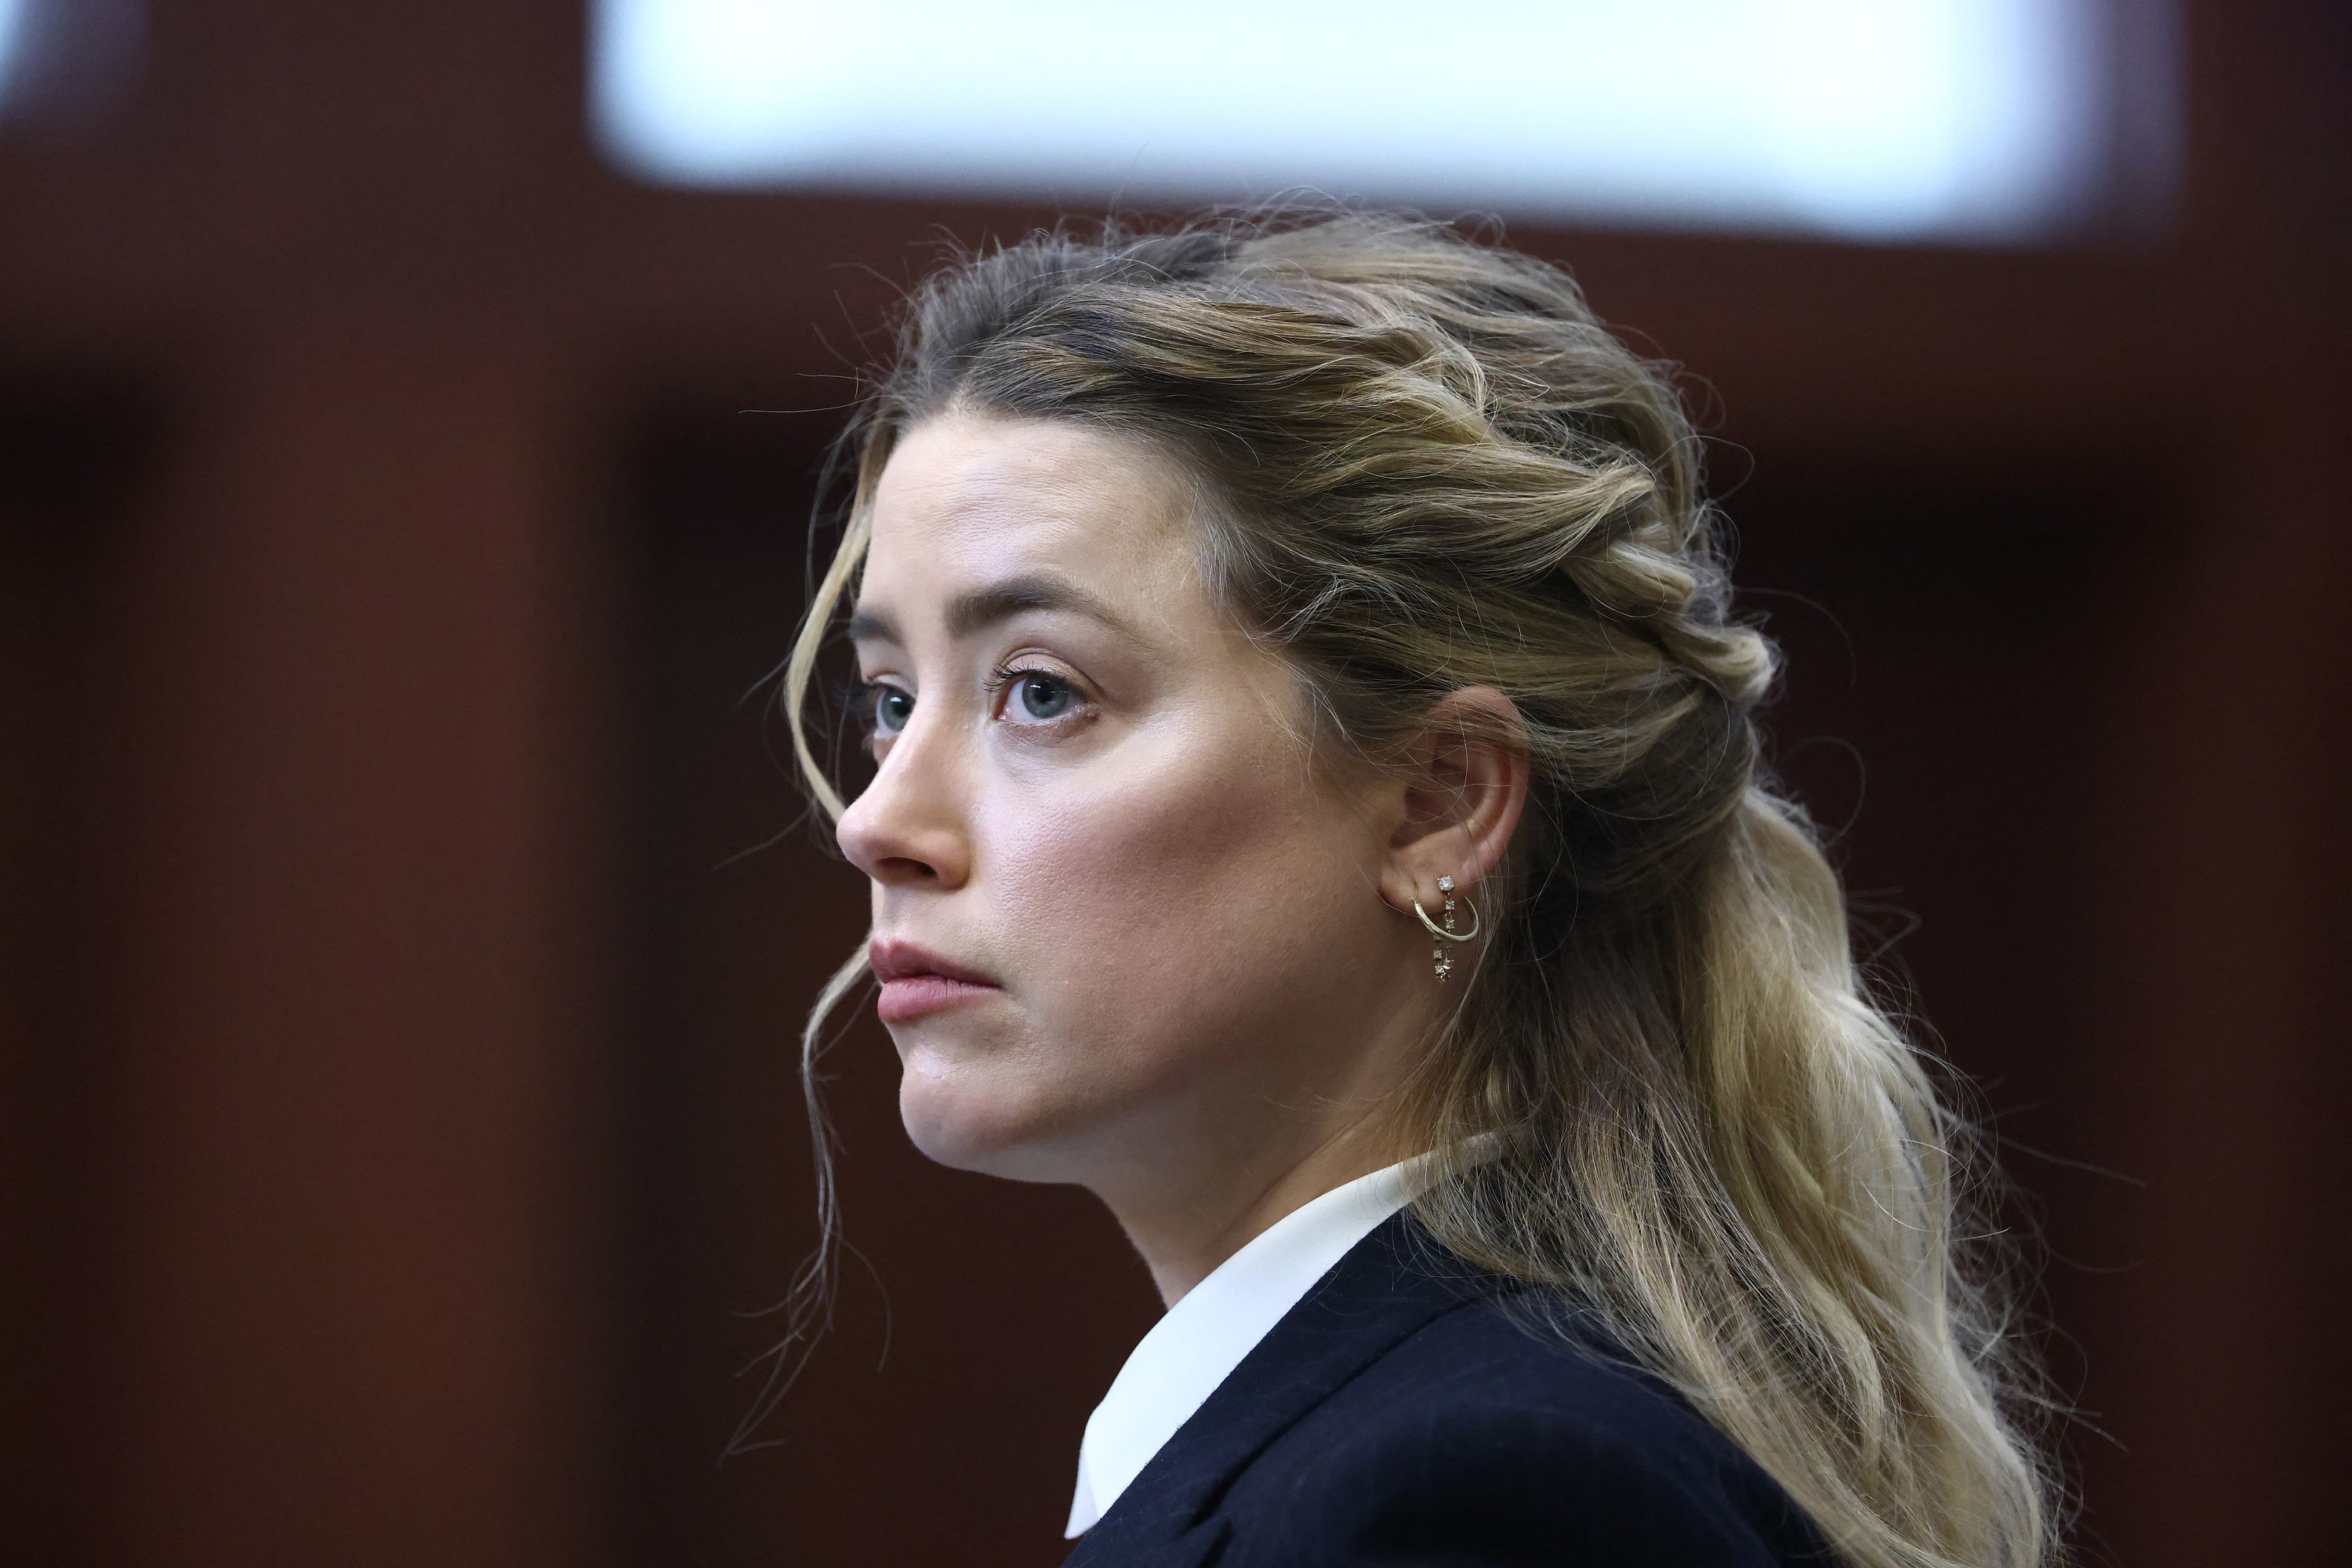 Amber Heard attends the defamation trial against her at the Fairfax County Circuit Courthouse in Fairfax, Virginia, April 21, 2022.